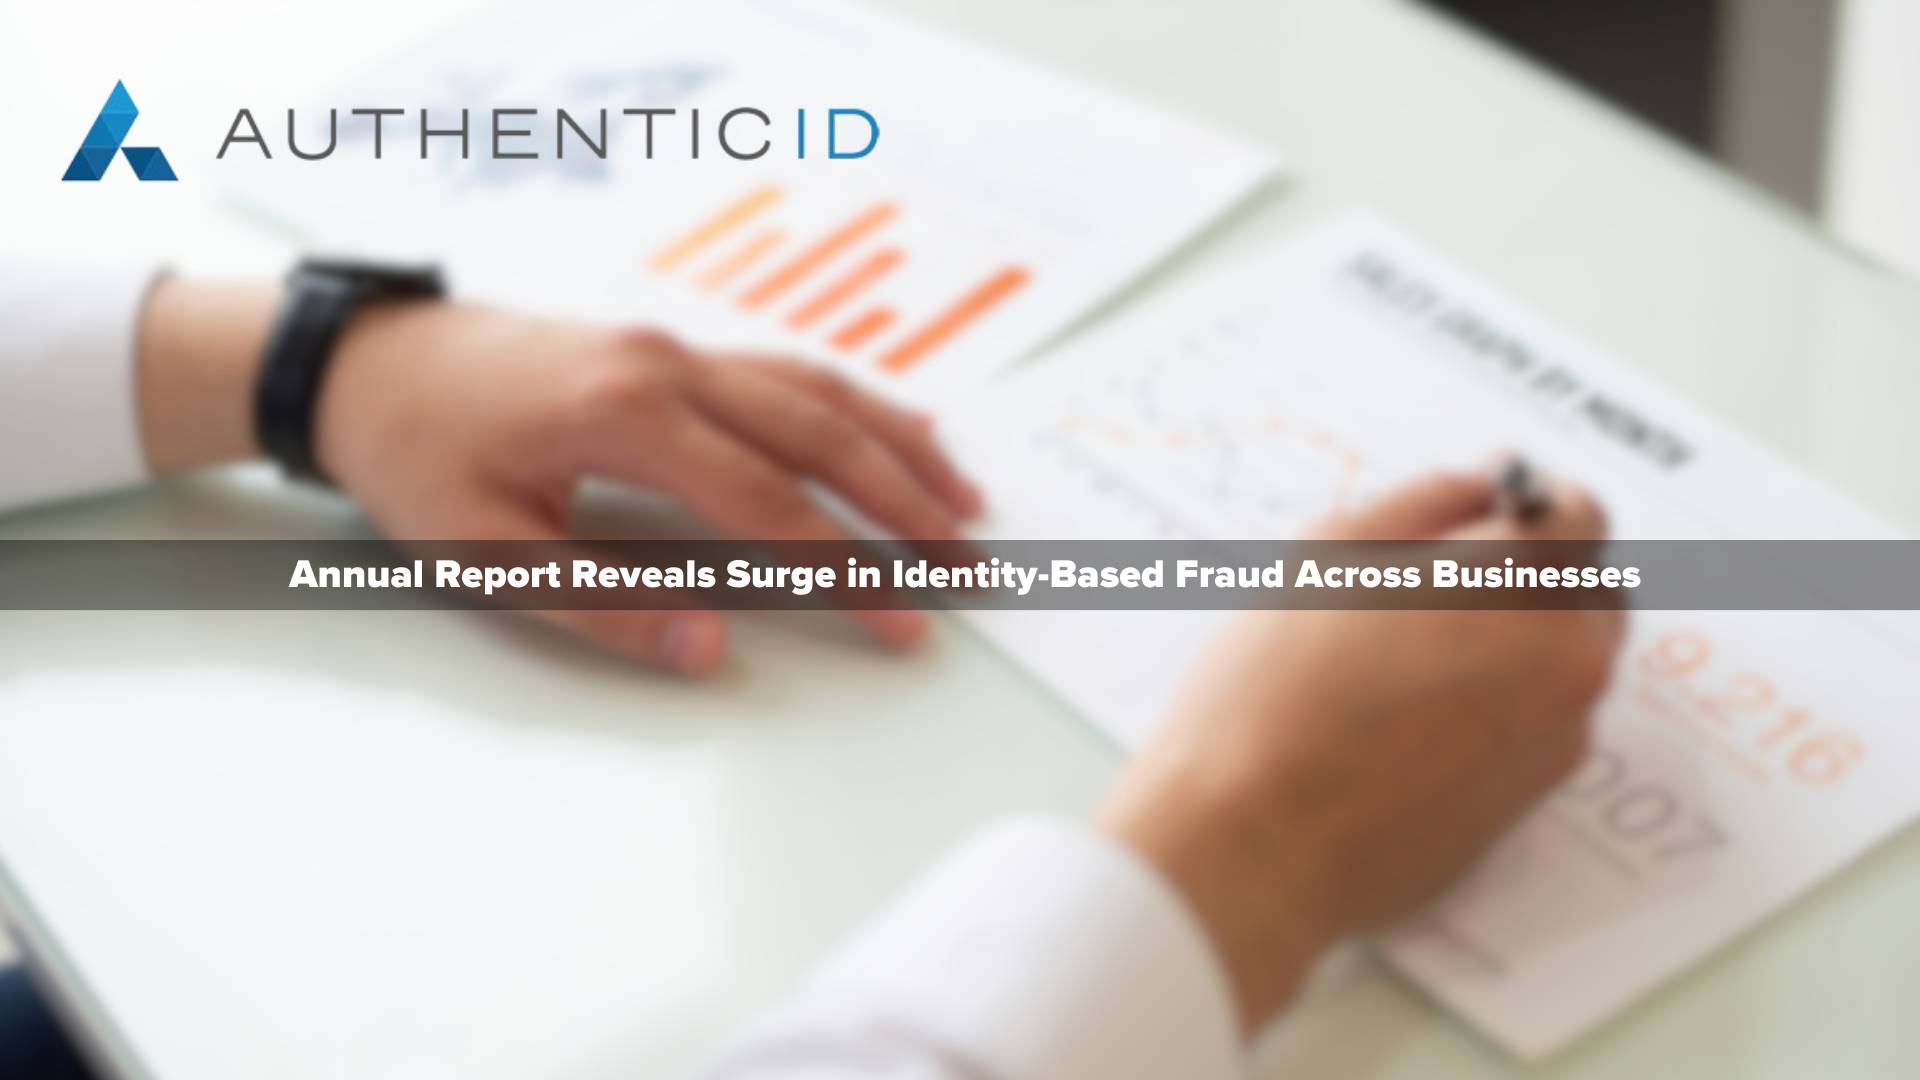 AuthenticID Annual Report Reveals Surge in Identity-Based Fraud Across Businesses